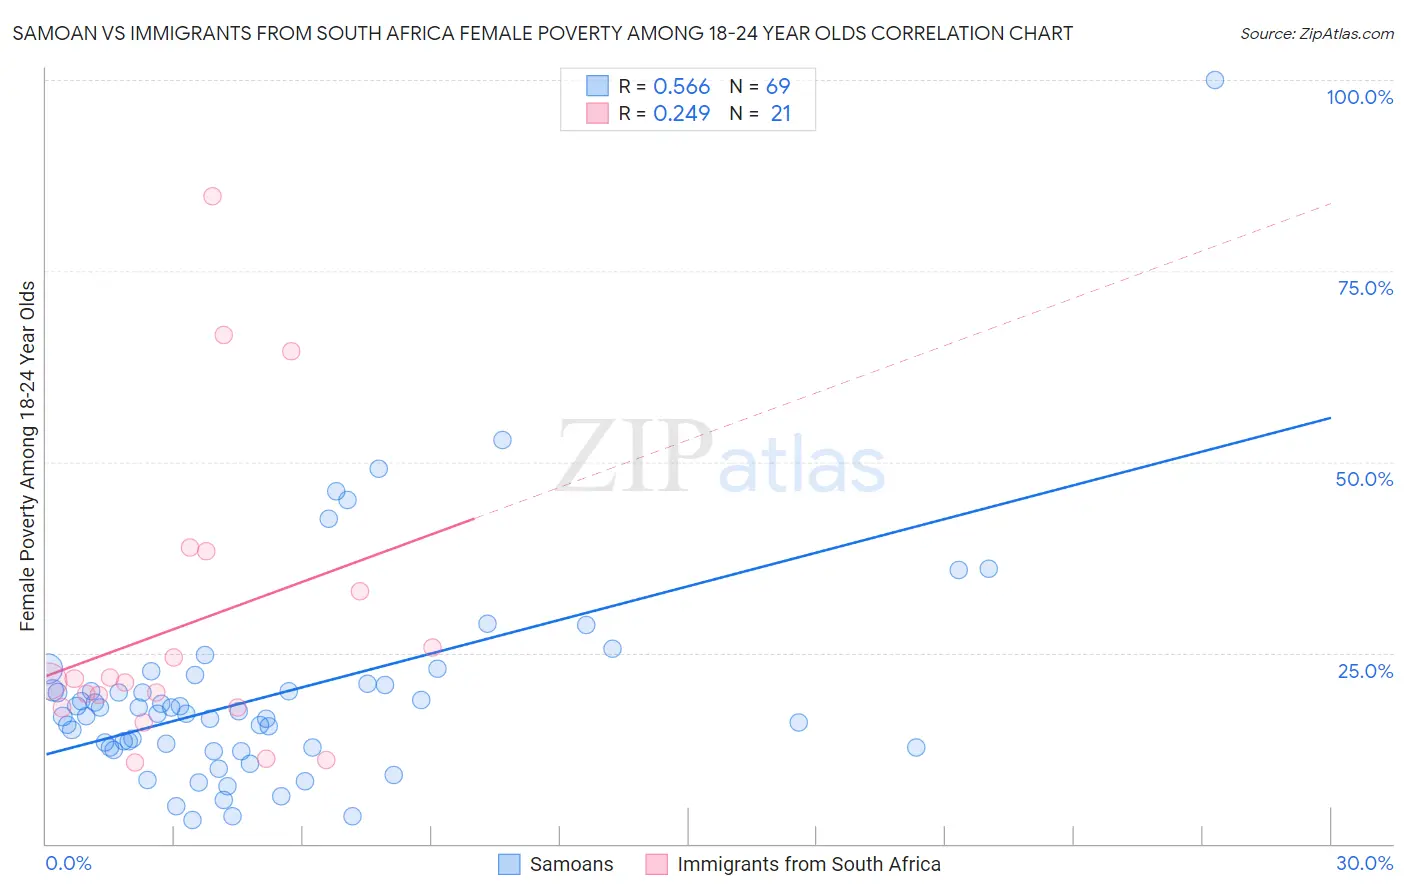 Samoan vs Immigrants from South Africa Female Poverty Among 18-24 Year Olds